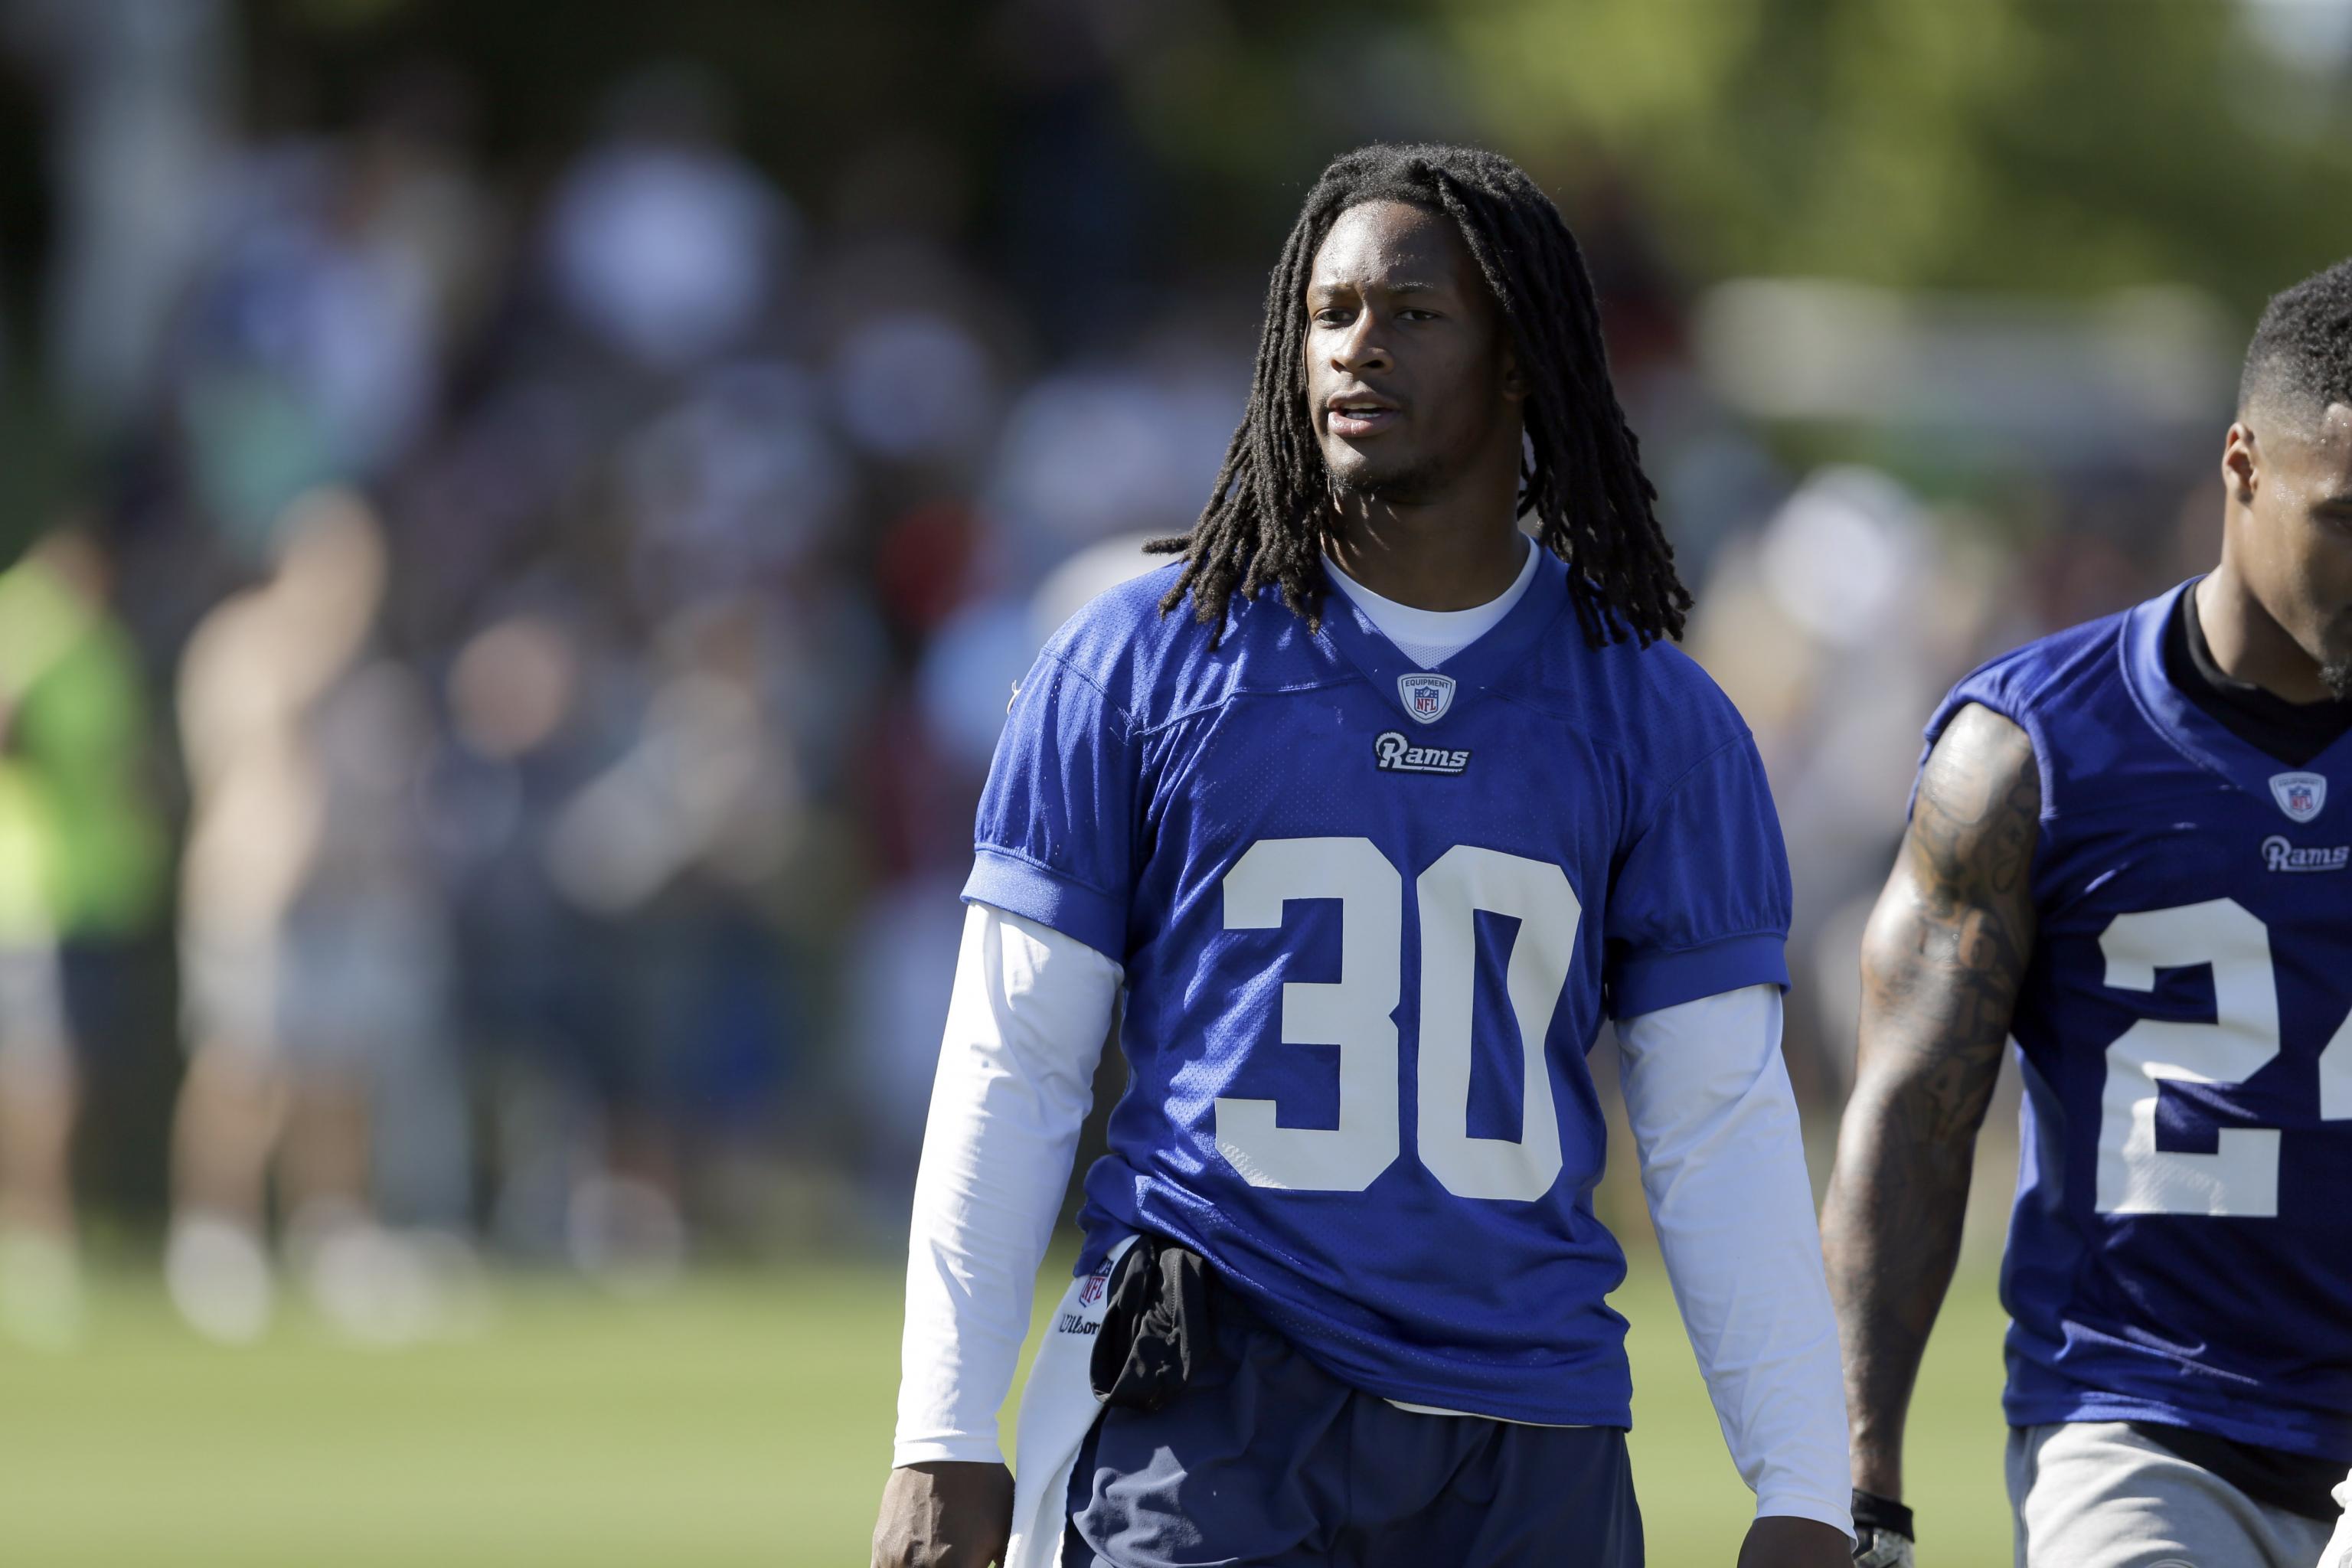 After impressing new teammates, Todd Gurley ready to suit up for